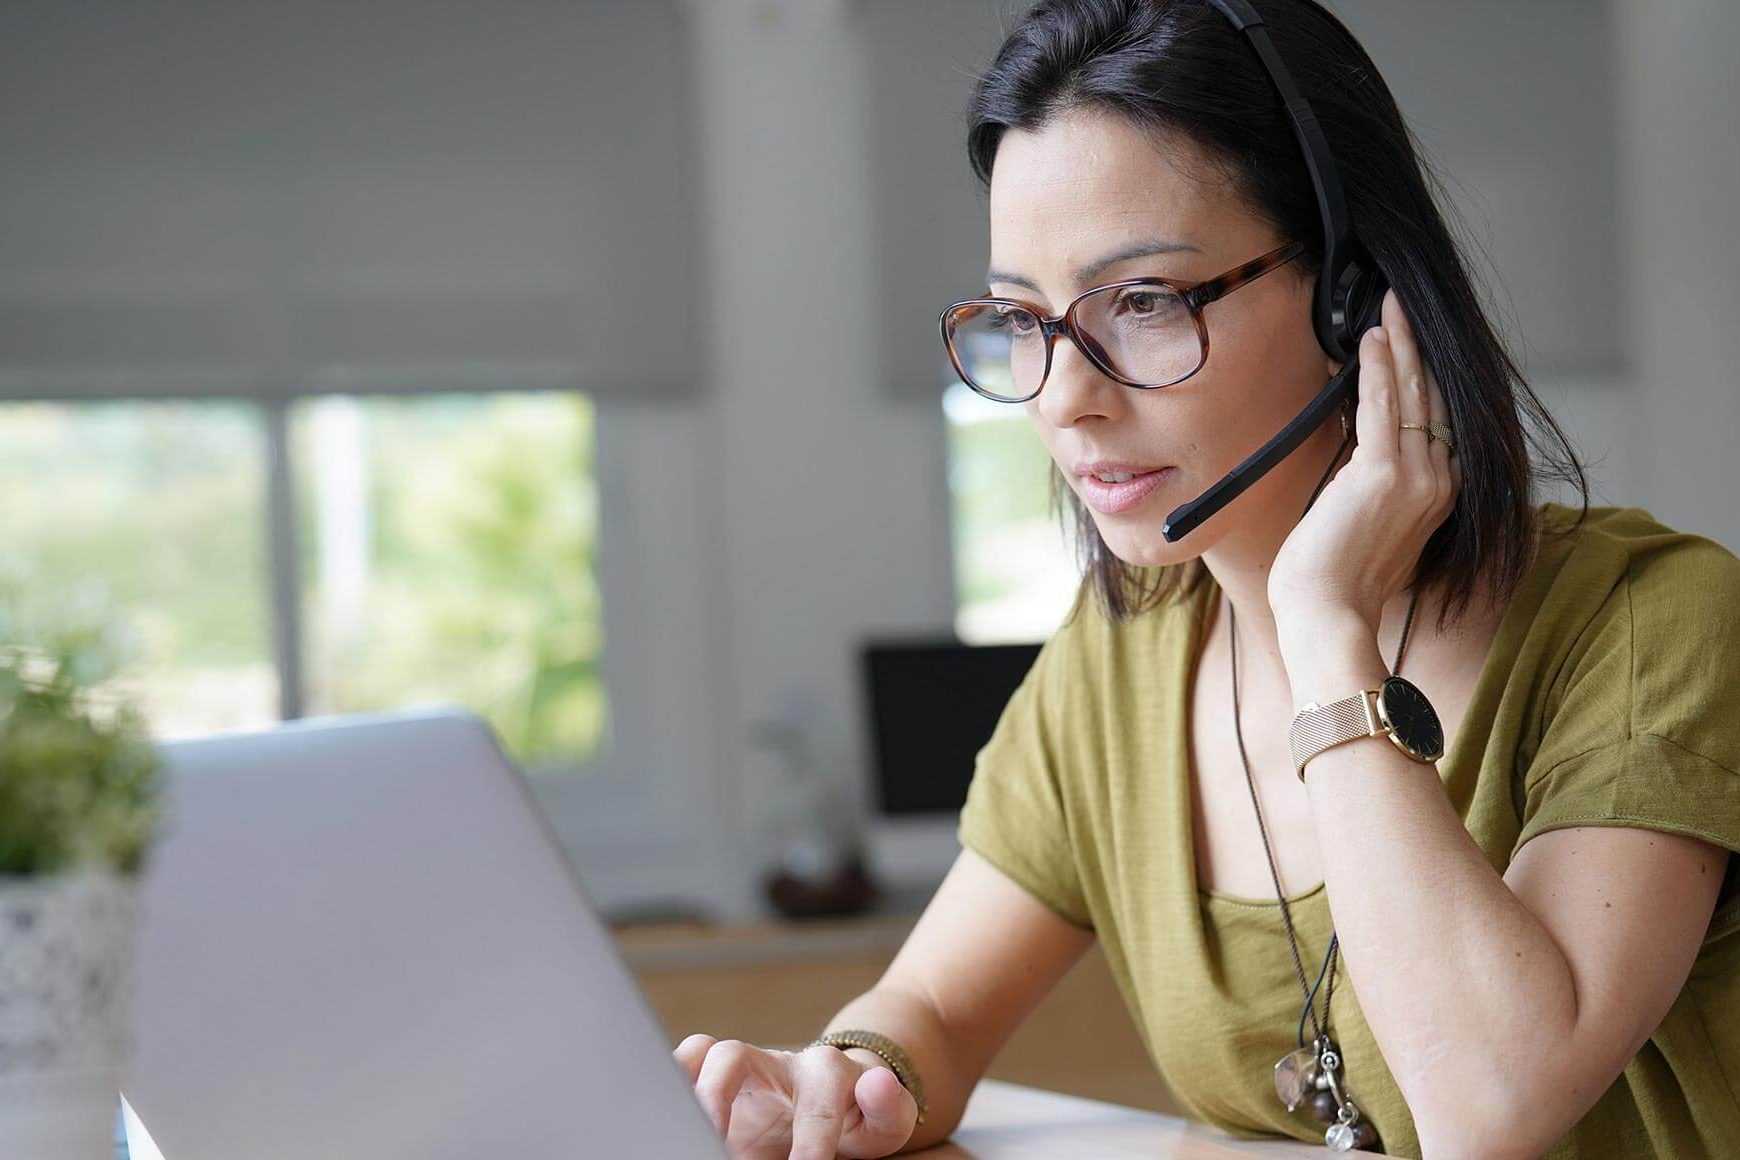 How to Hire and Manage At-Home Call Center Agents